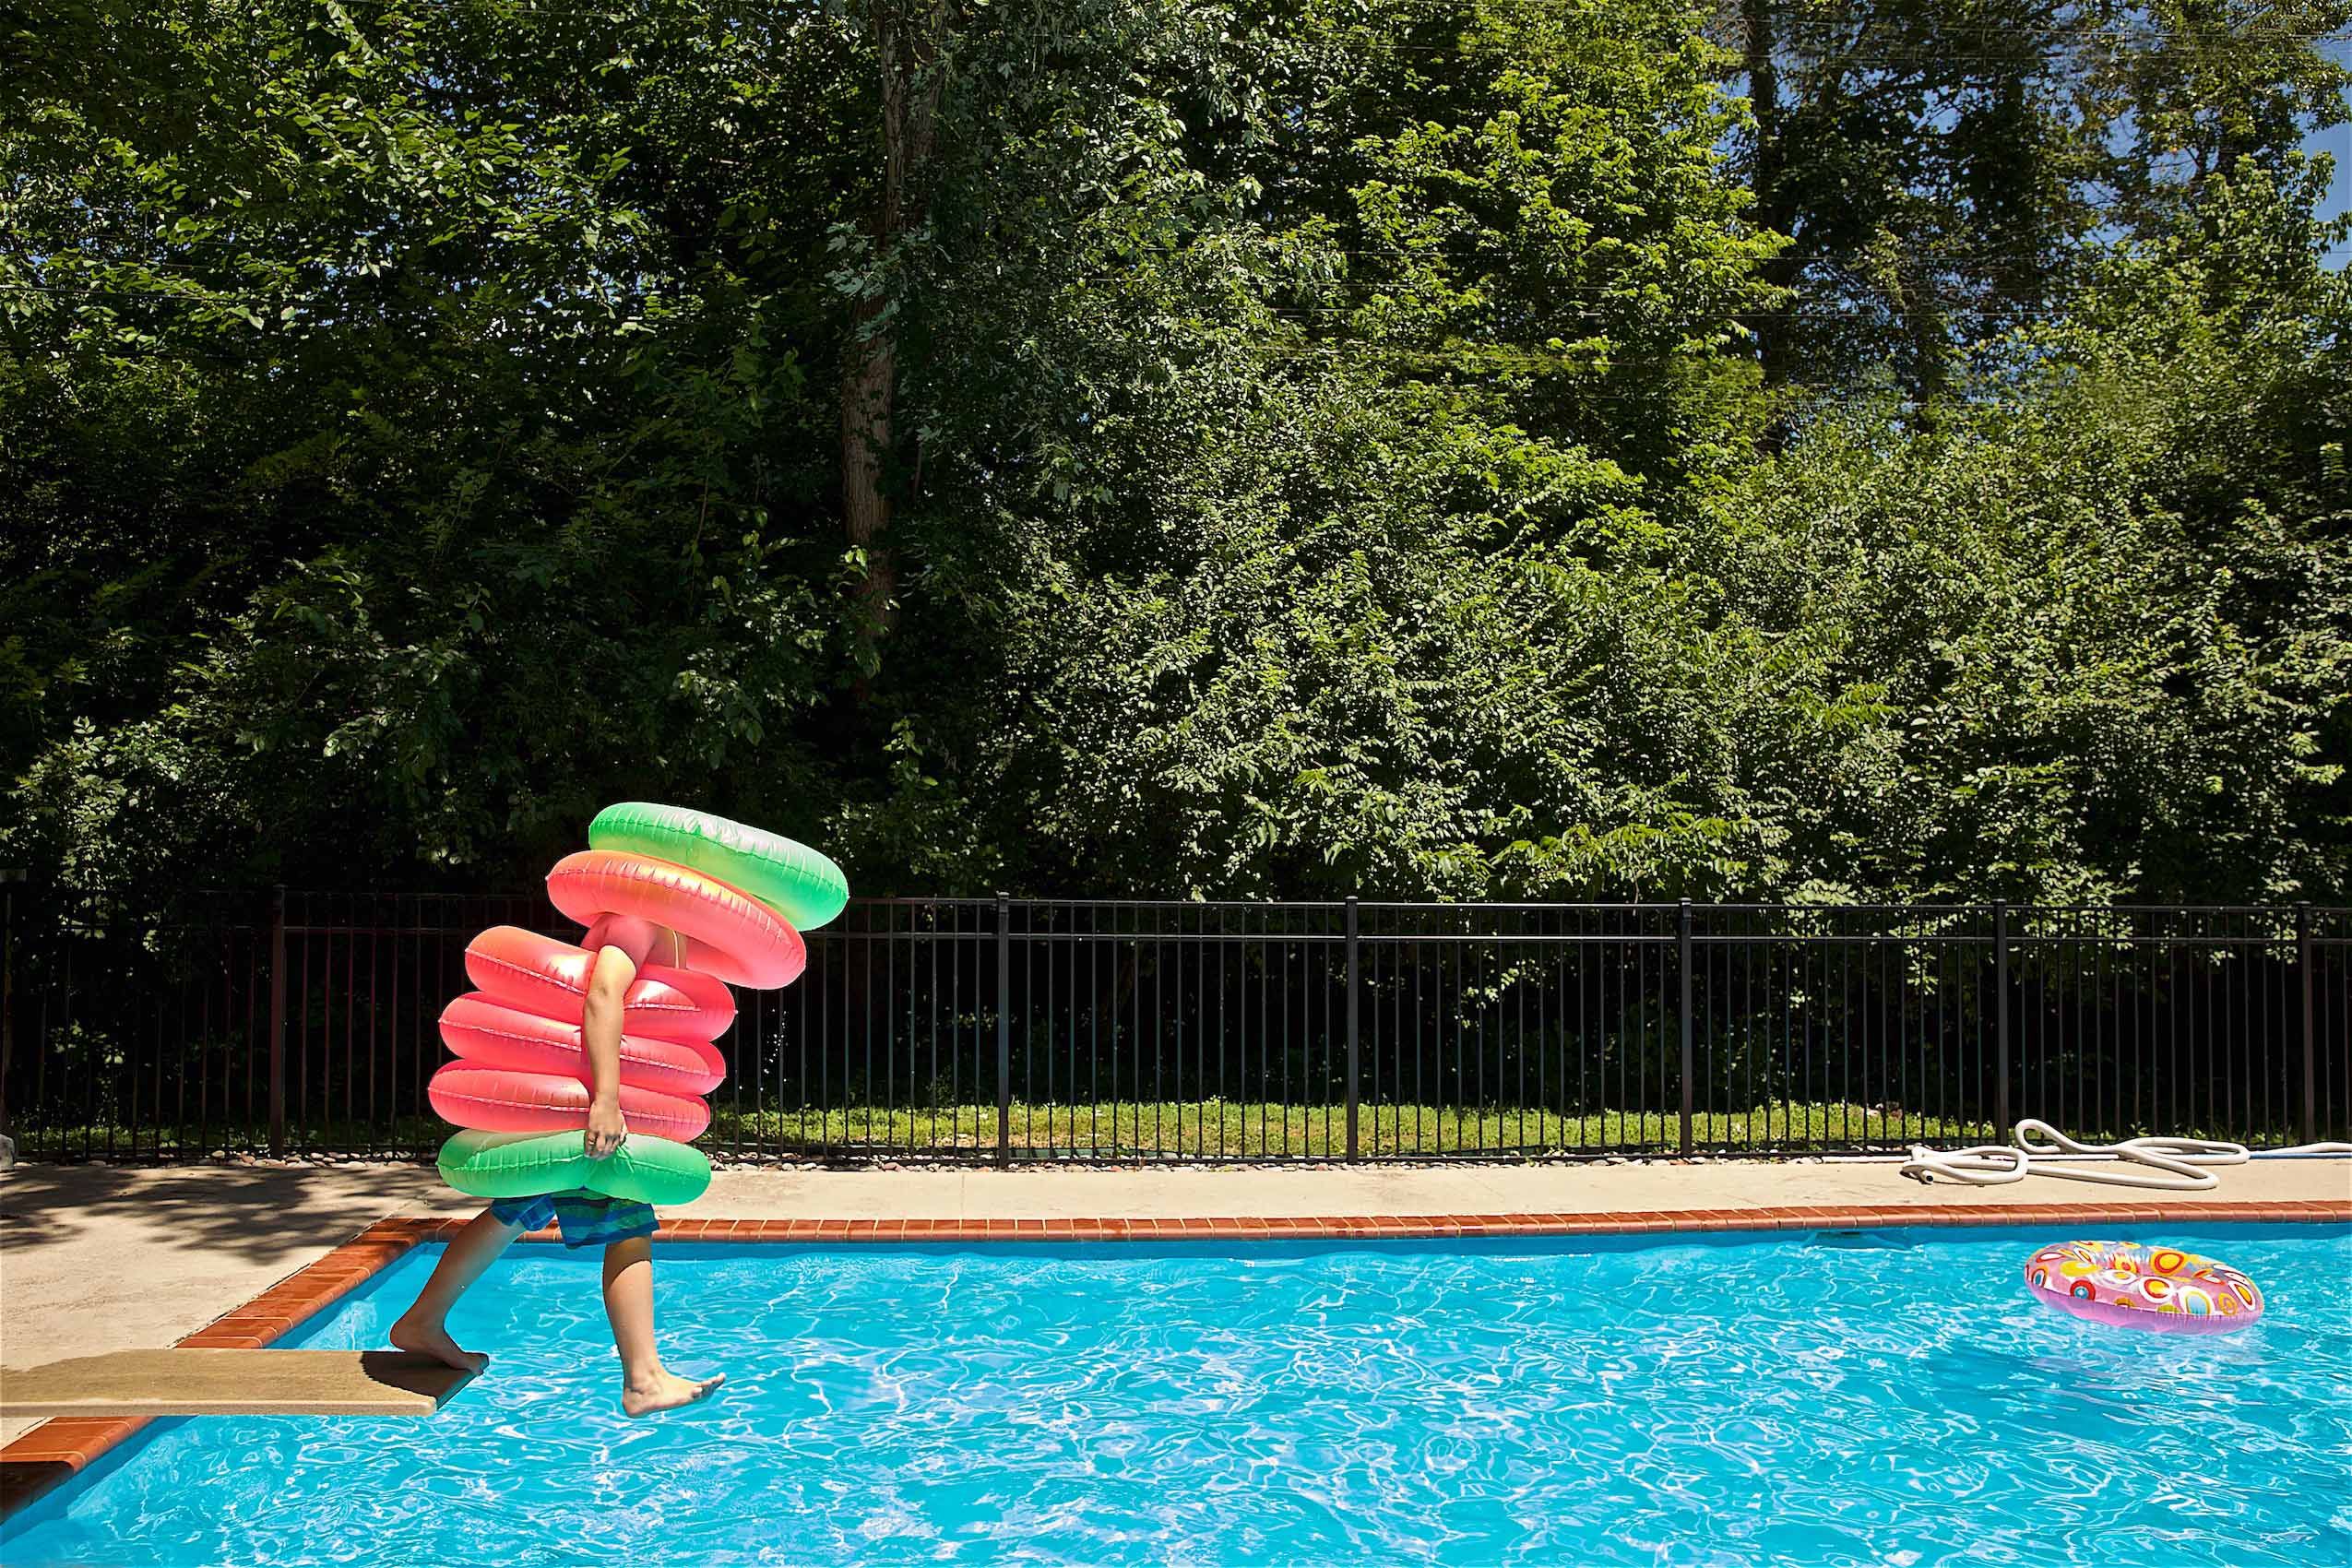 Boy Jumping off Diving Board with Many Pool Tubes